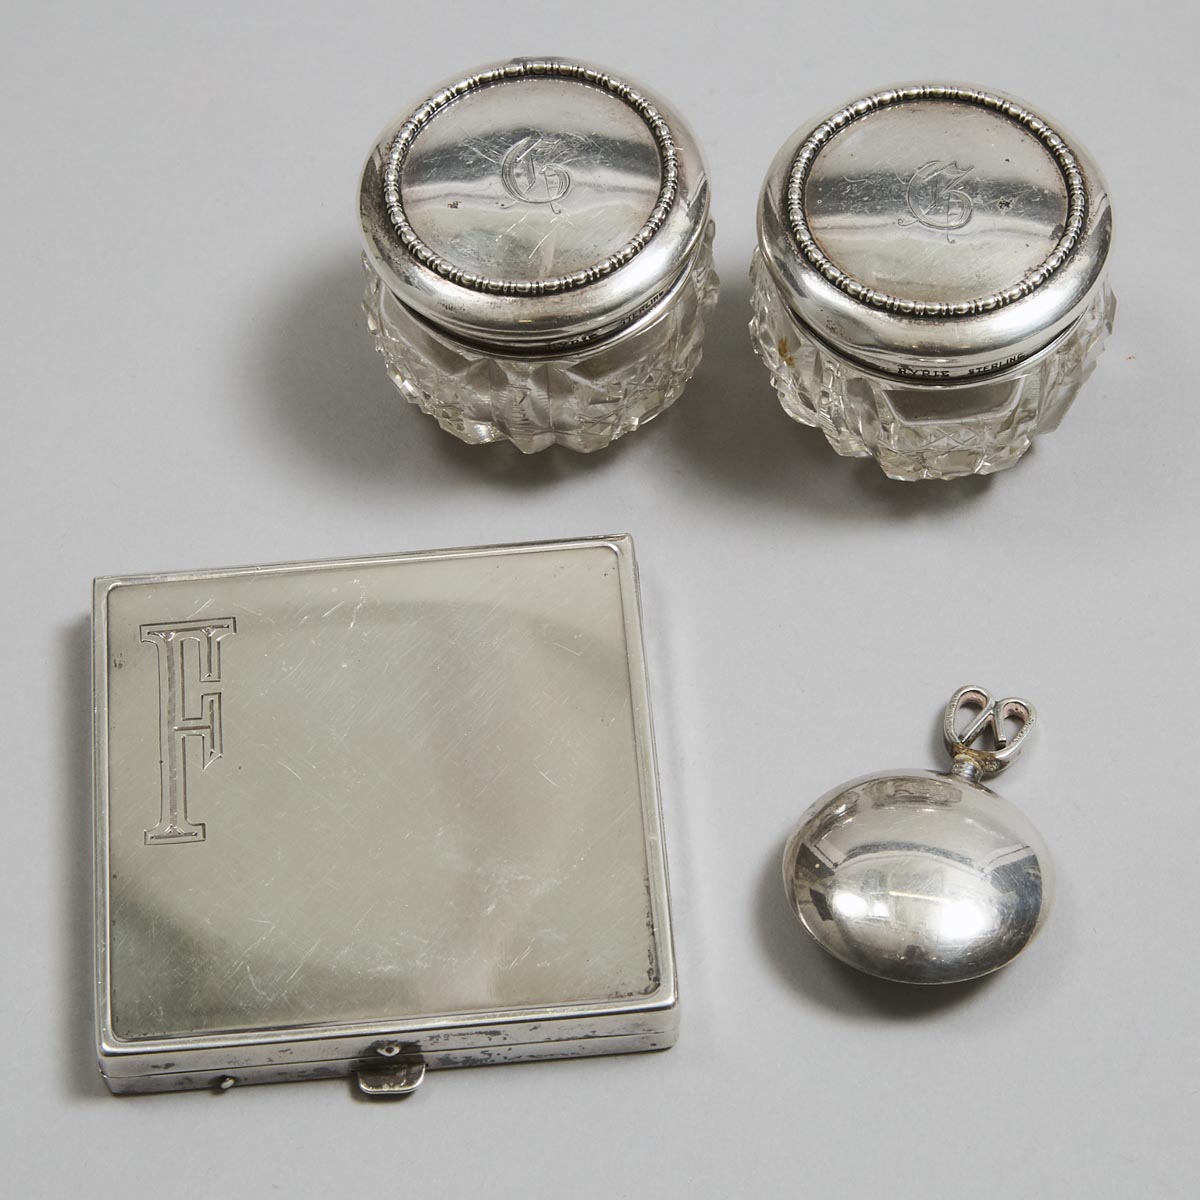 Canadian Silver Compact, Perfume Phial and Two Small Covered Glass Jars, 20th century